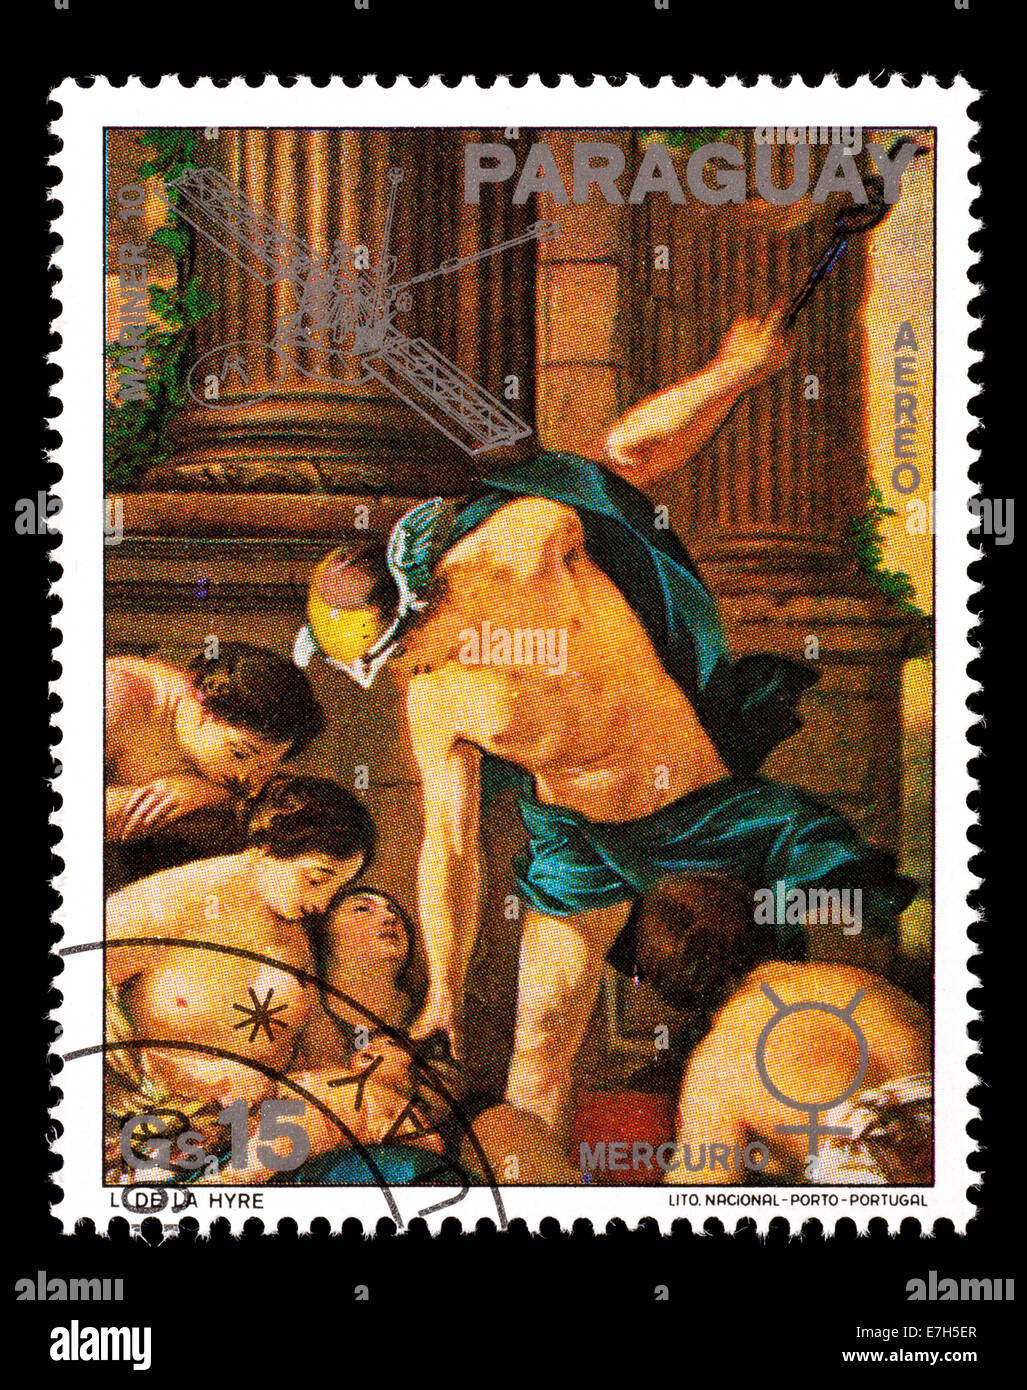 Postage stamp from Paraguay depicting the de la Hyre painting detail of Mercury. Stock Photo